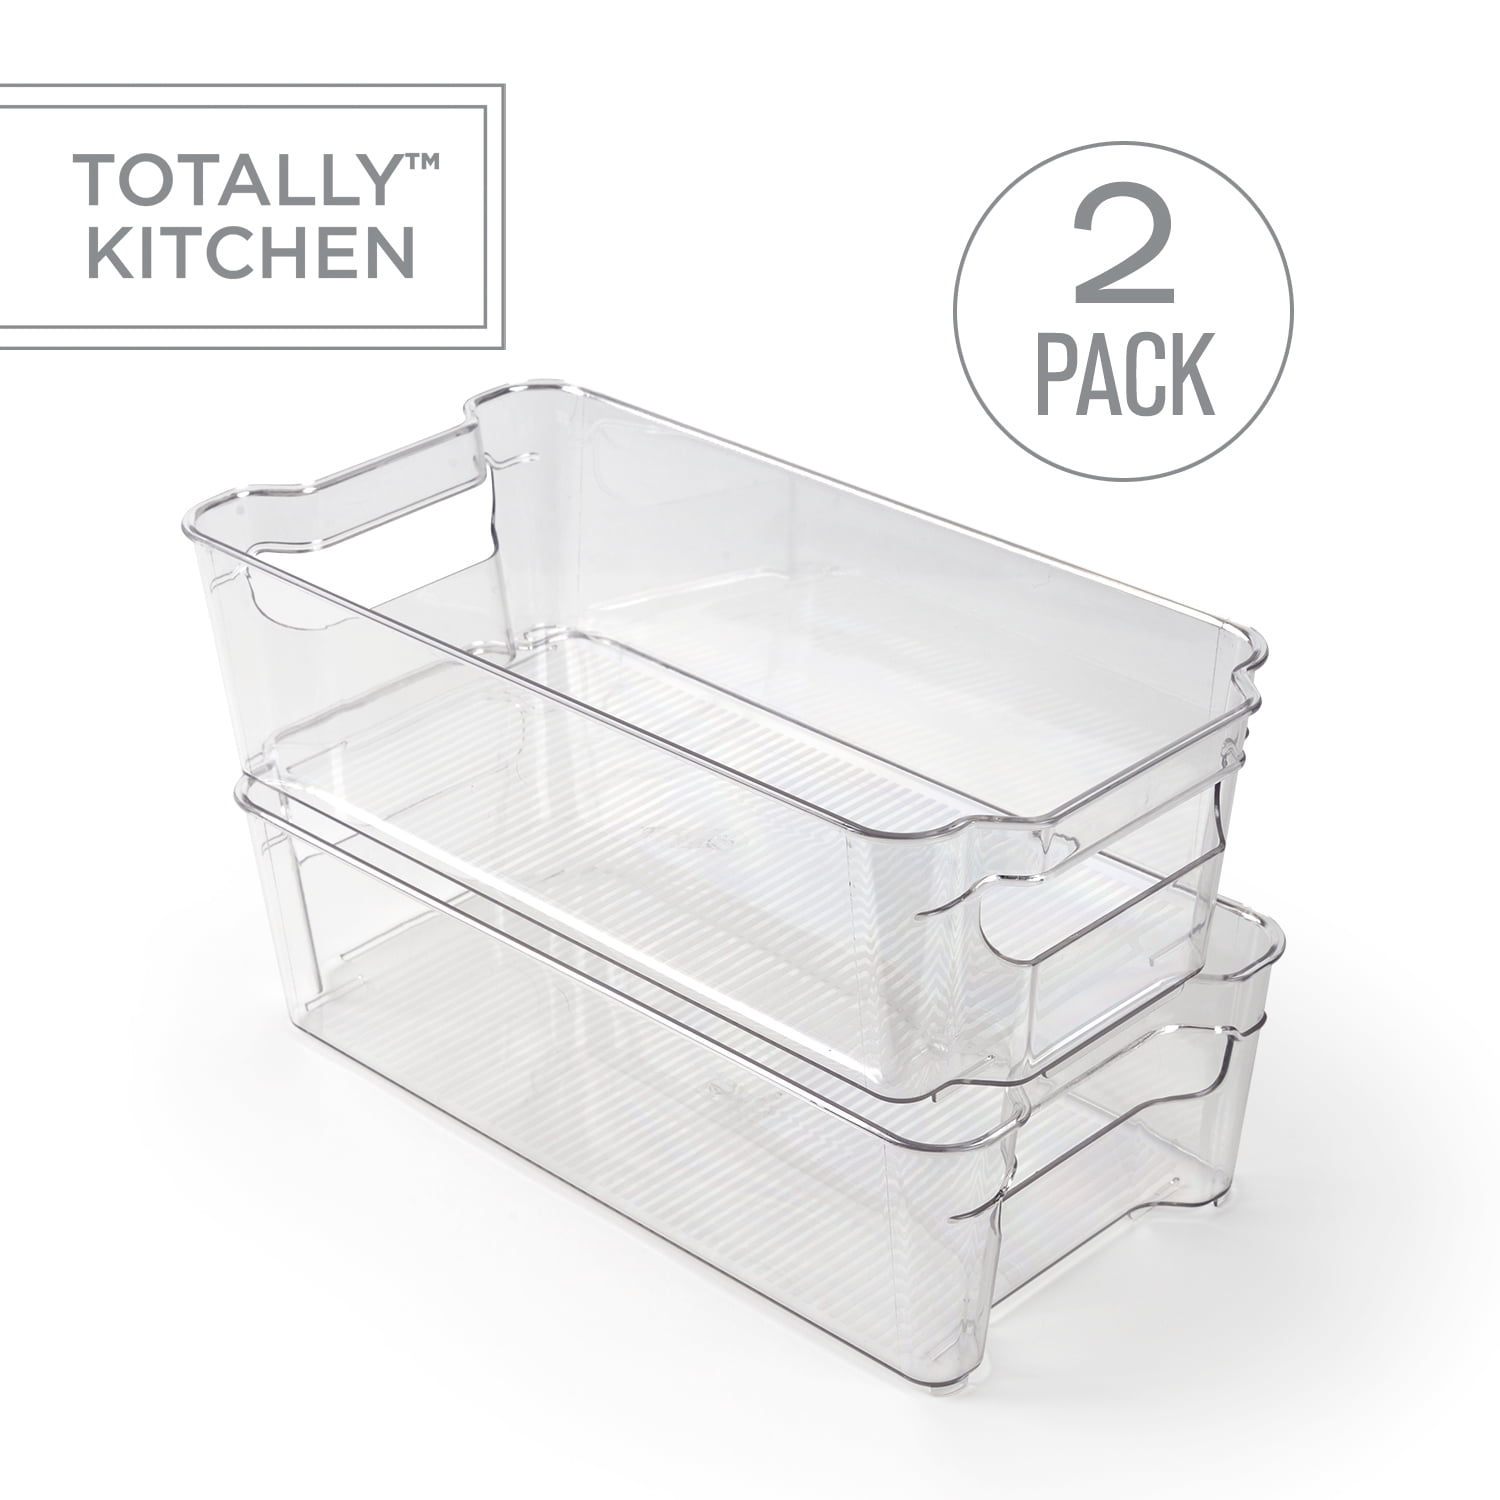 Clear Refrigerator Organizer Bins - 2 Pack Medium Sized (6 x 12.4) Clear  Bins for Fridge with Liners, Containers for Fridge and Freezer